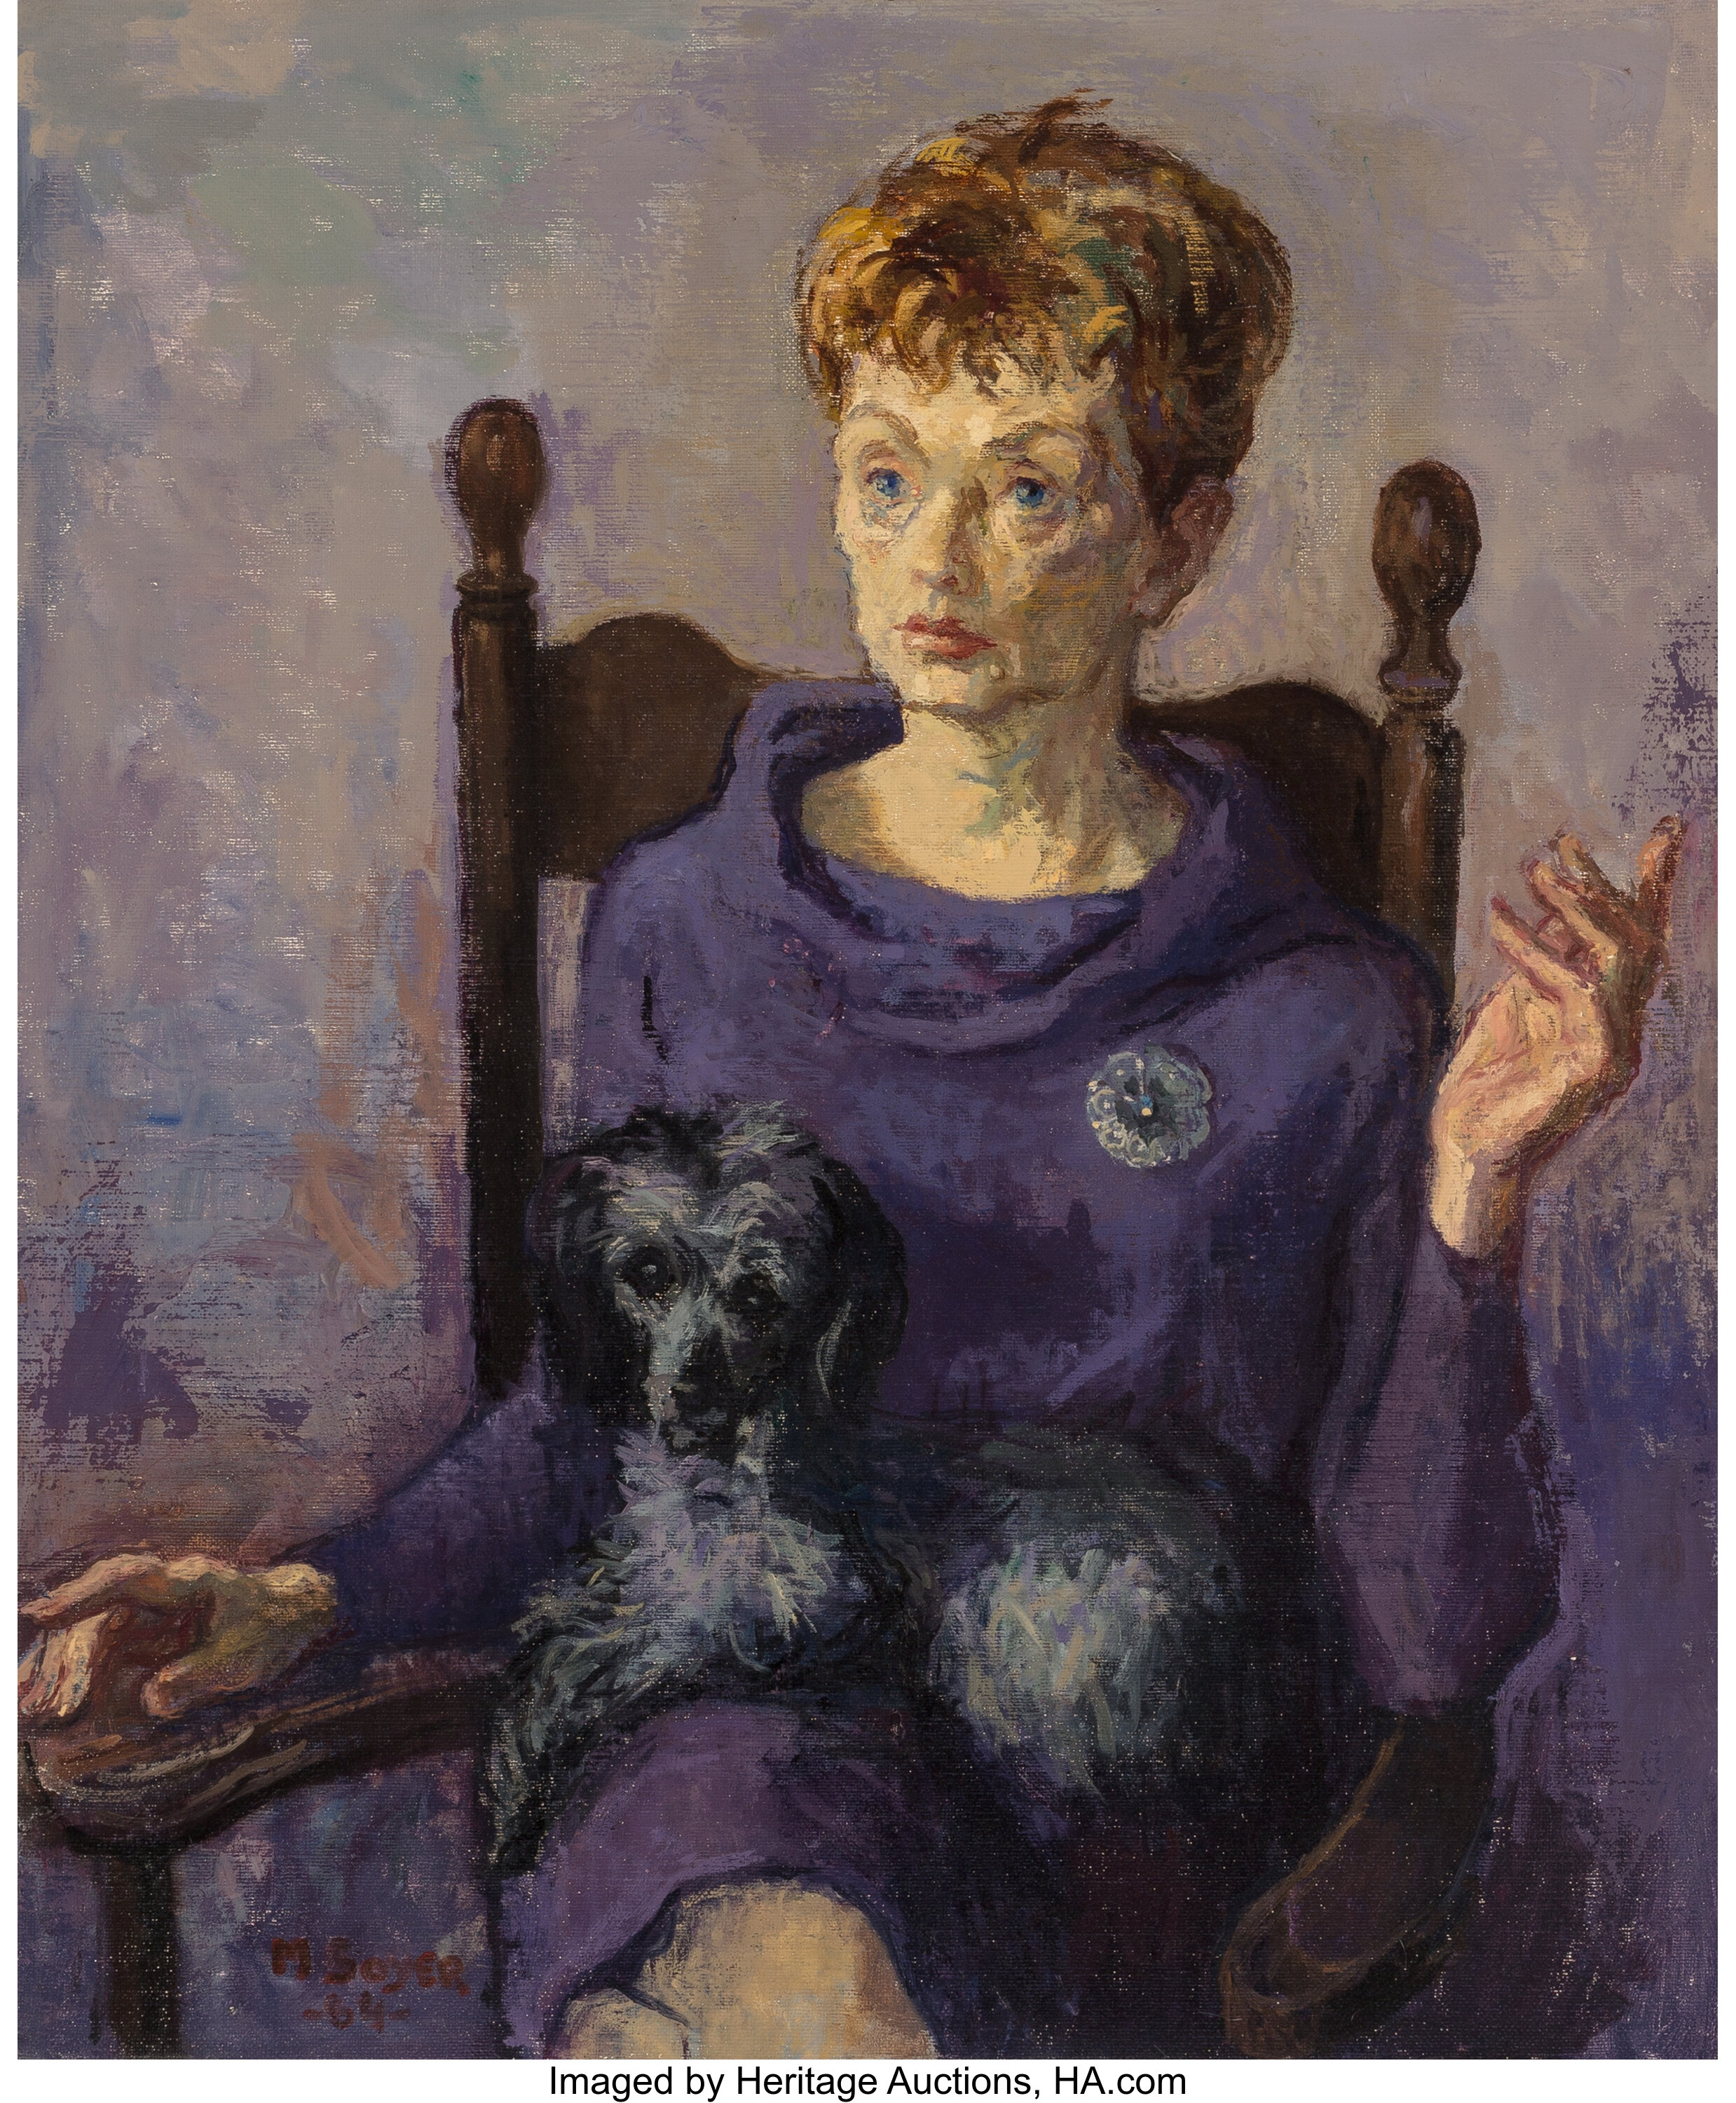 Moses Soyer (American, 1899-1974). Ida Soyer with Marthe, 1964. Oil | Lot #68109 | Heritage Auctions